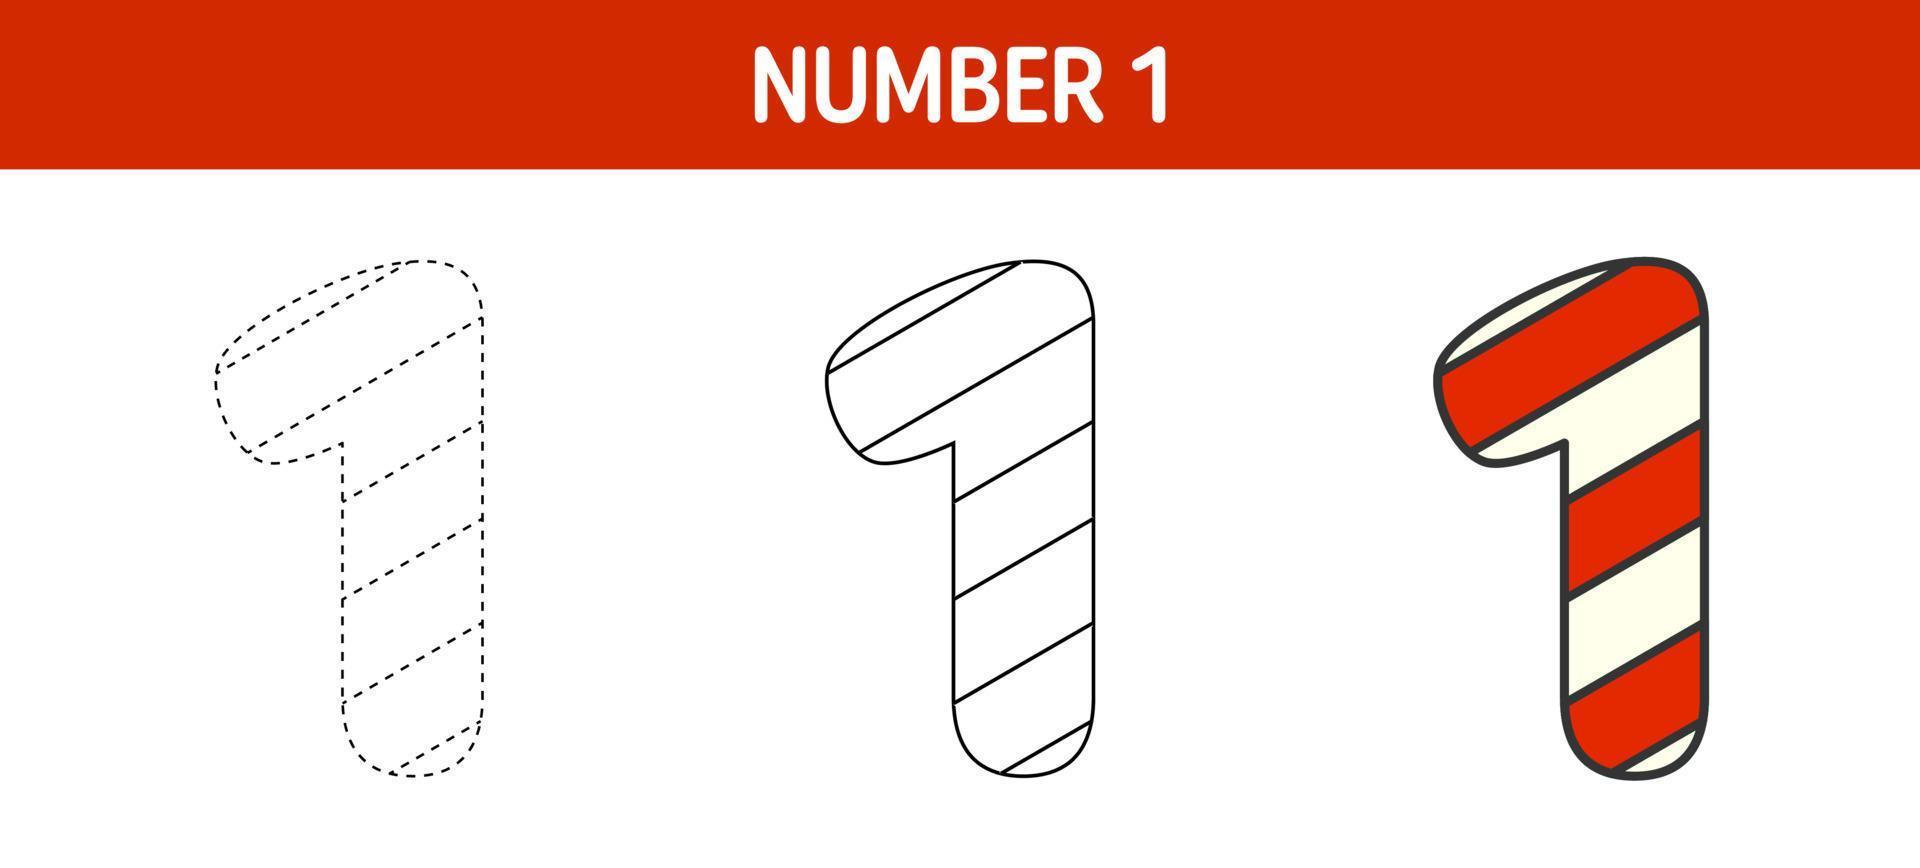 Number 1 Candy Cane, tracing and coloring worksheet for kids vector